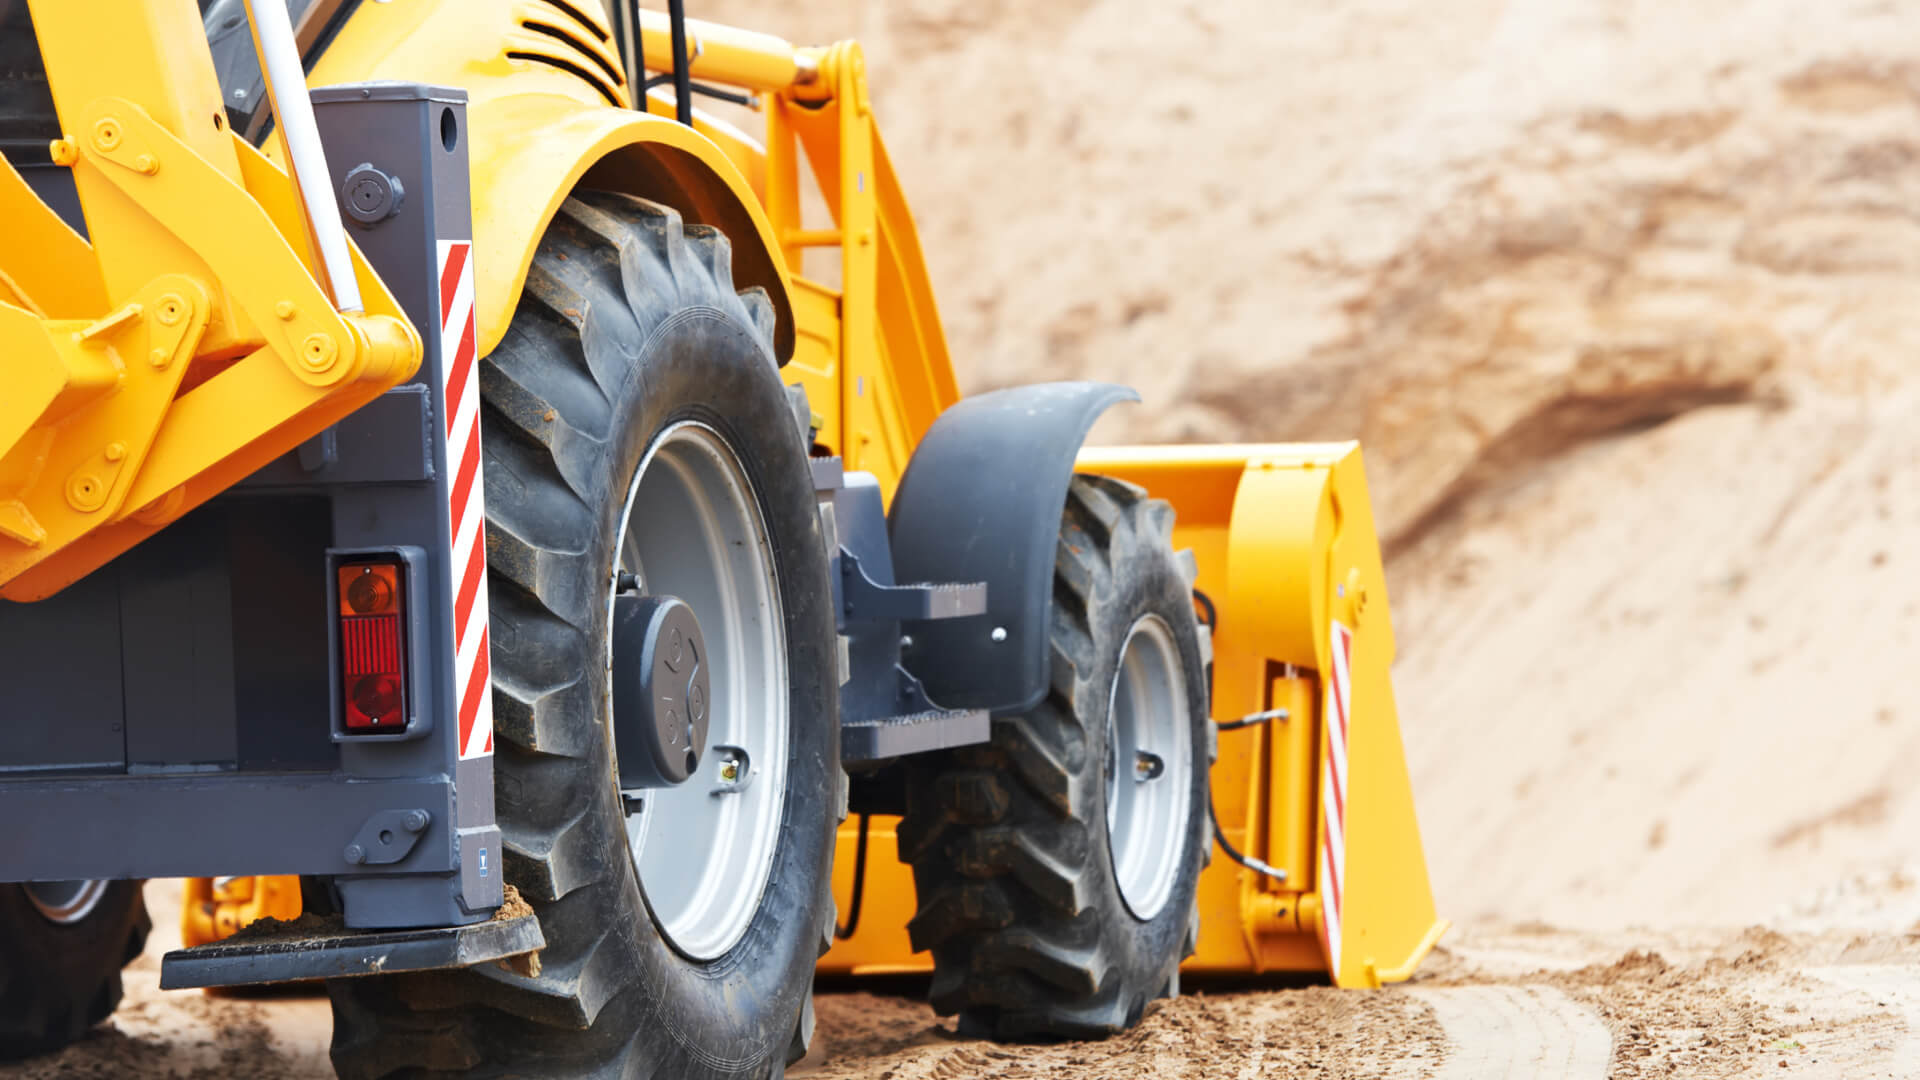 5 Reasons Why Renting Construction Equipment is Better Than Buying